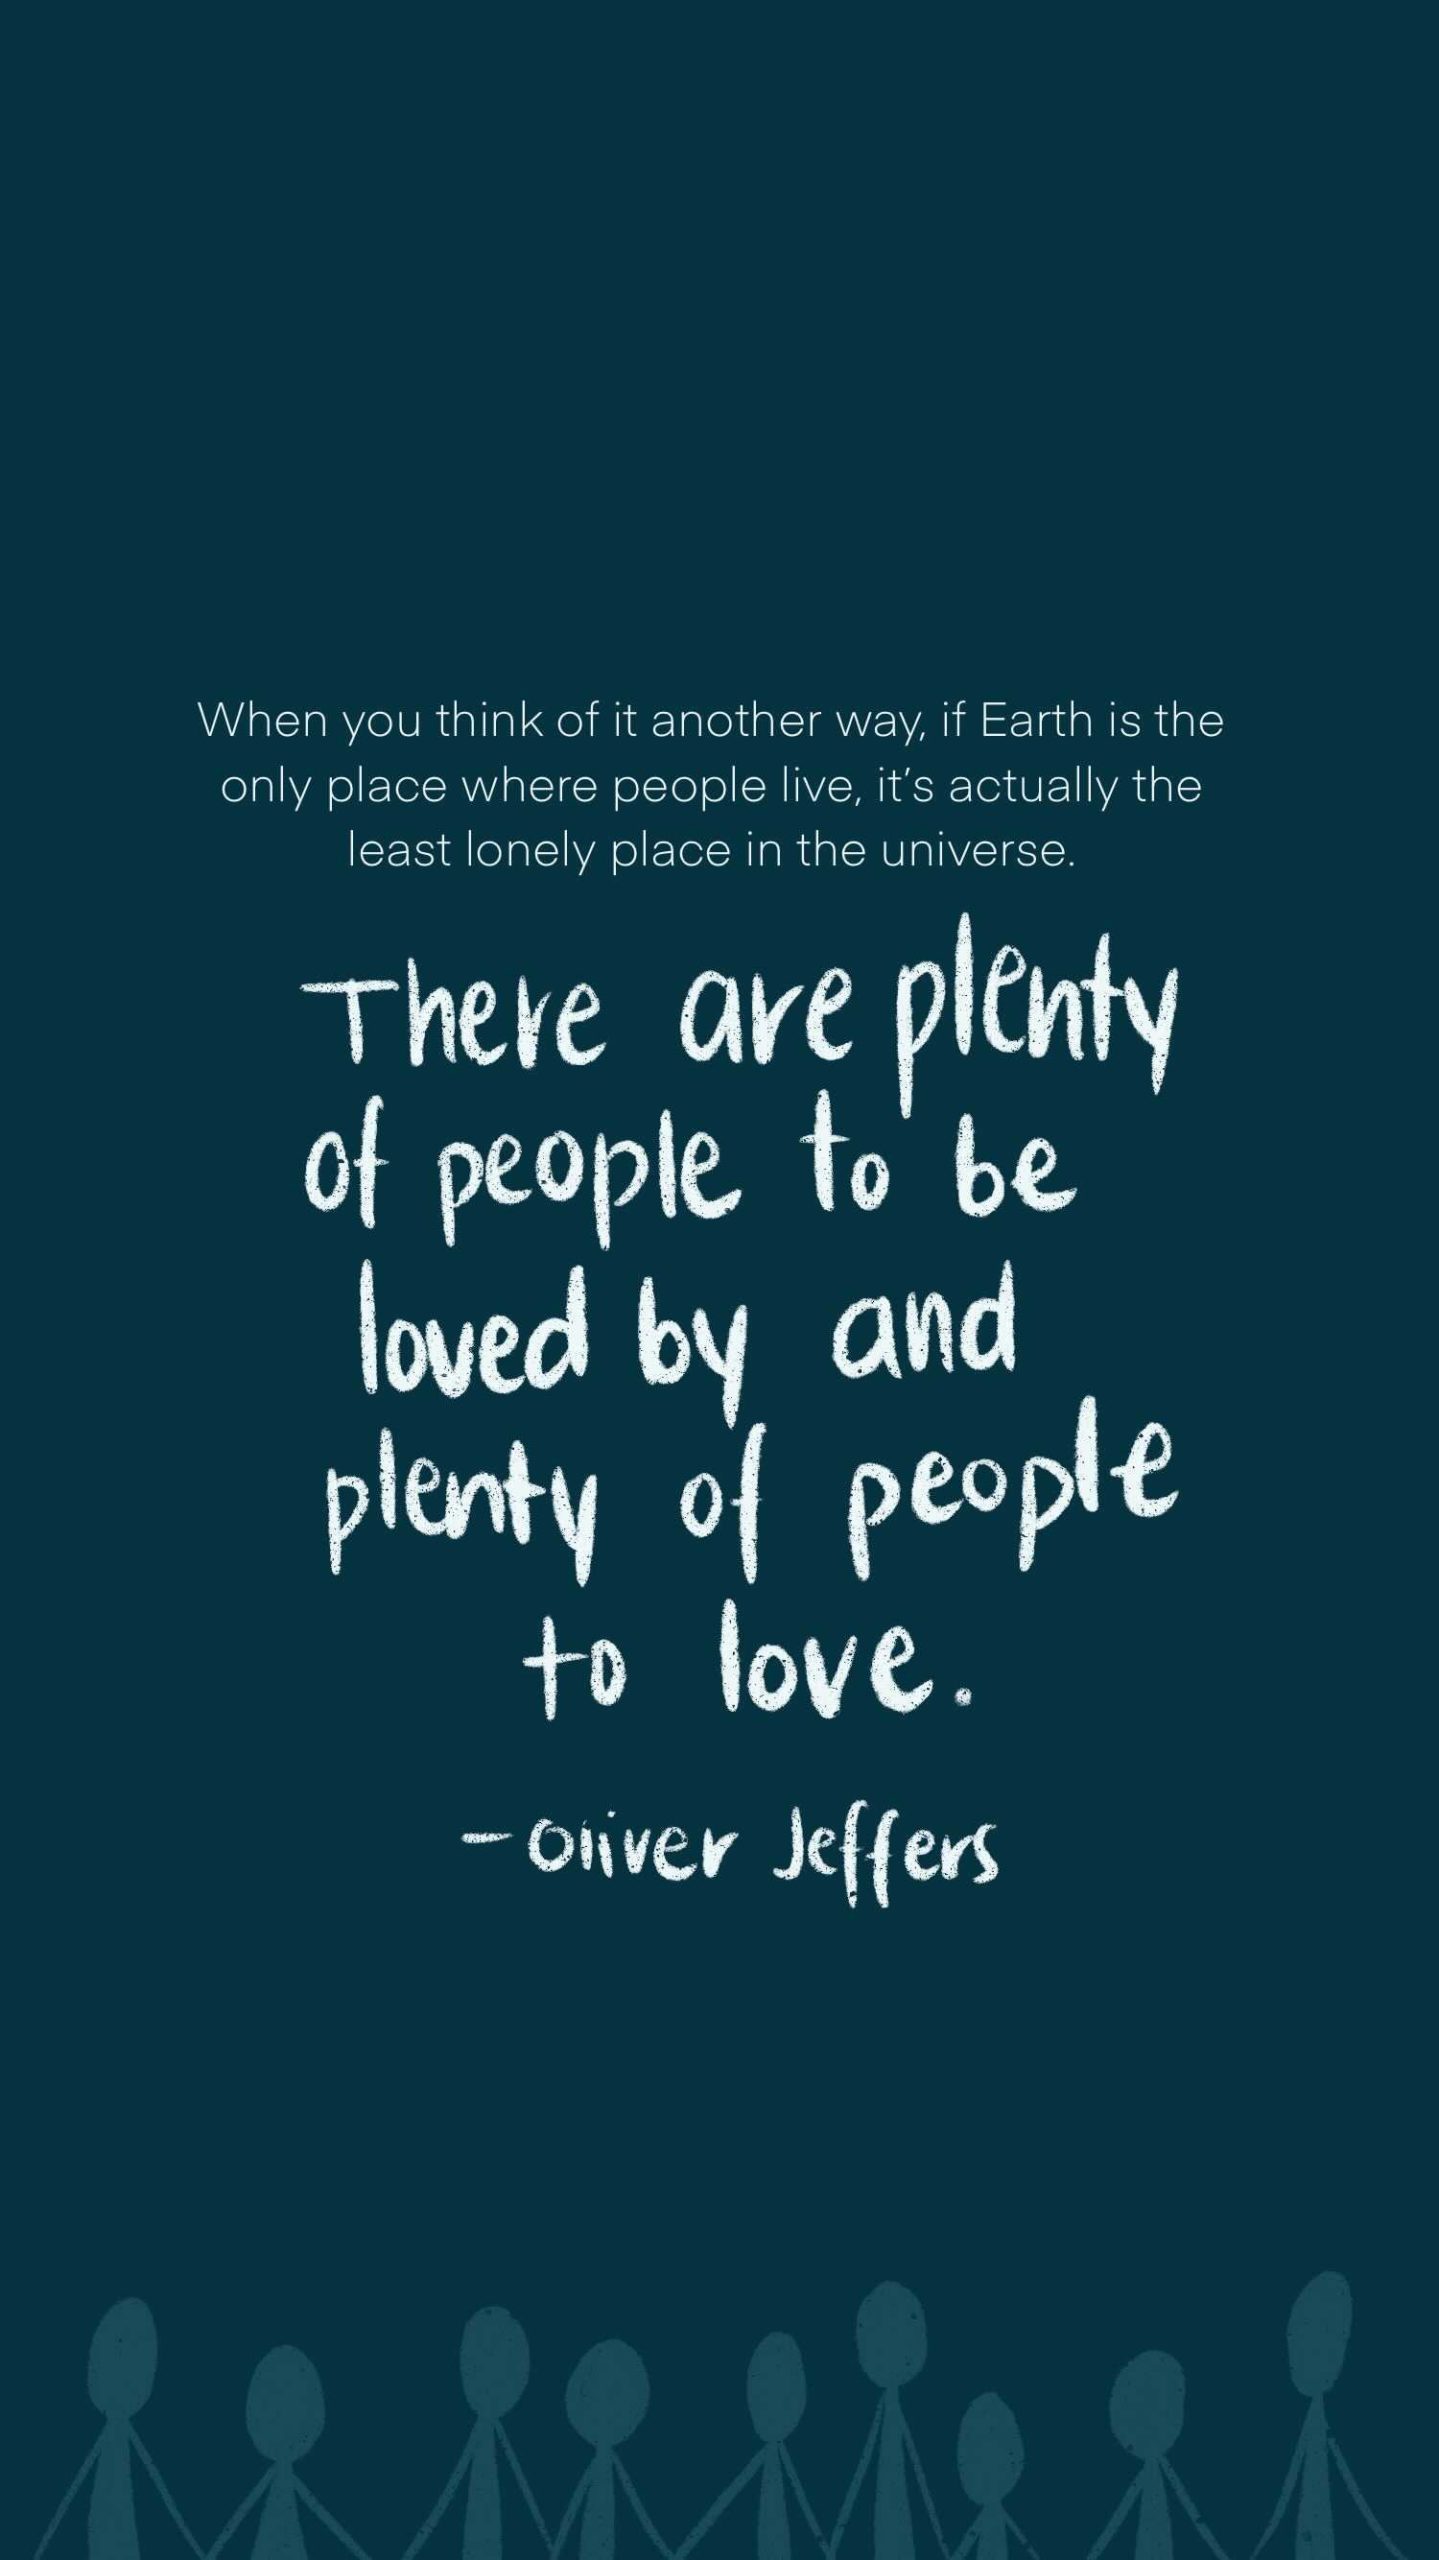 Quote- There are plenty of people to be loved by and plenty of people to love -Oliver Jeffers